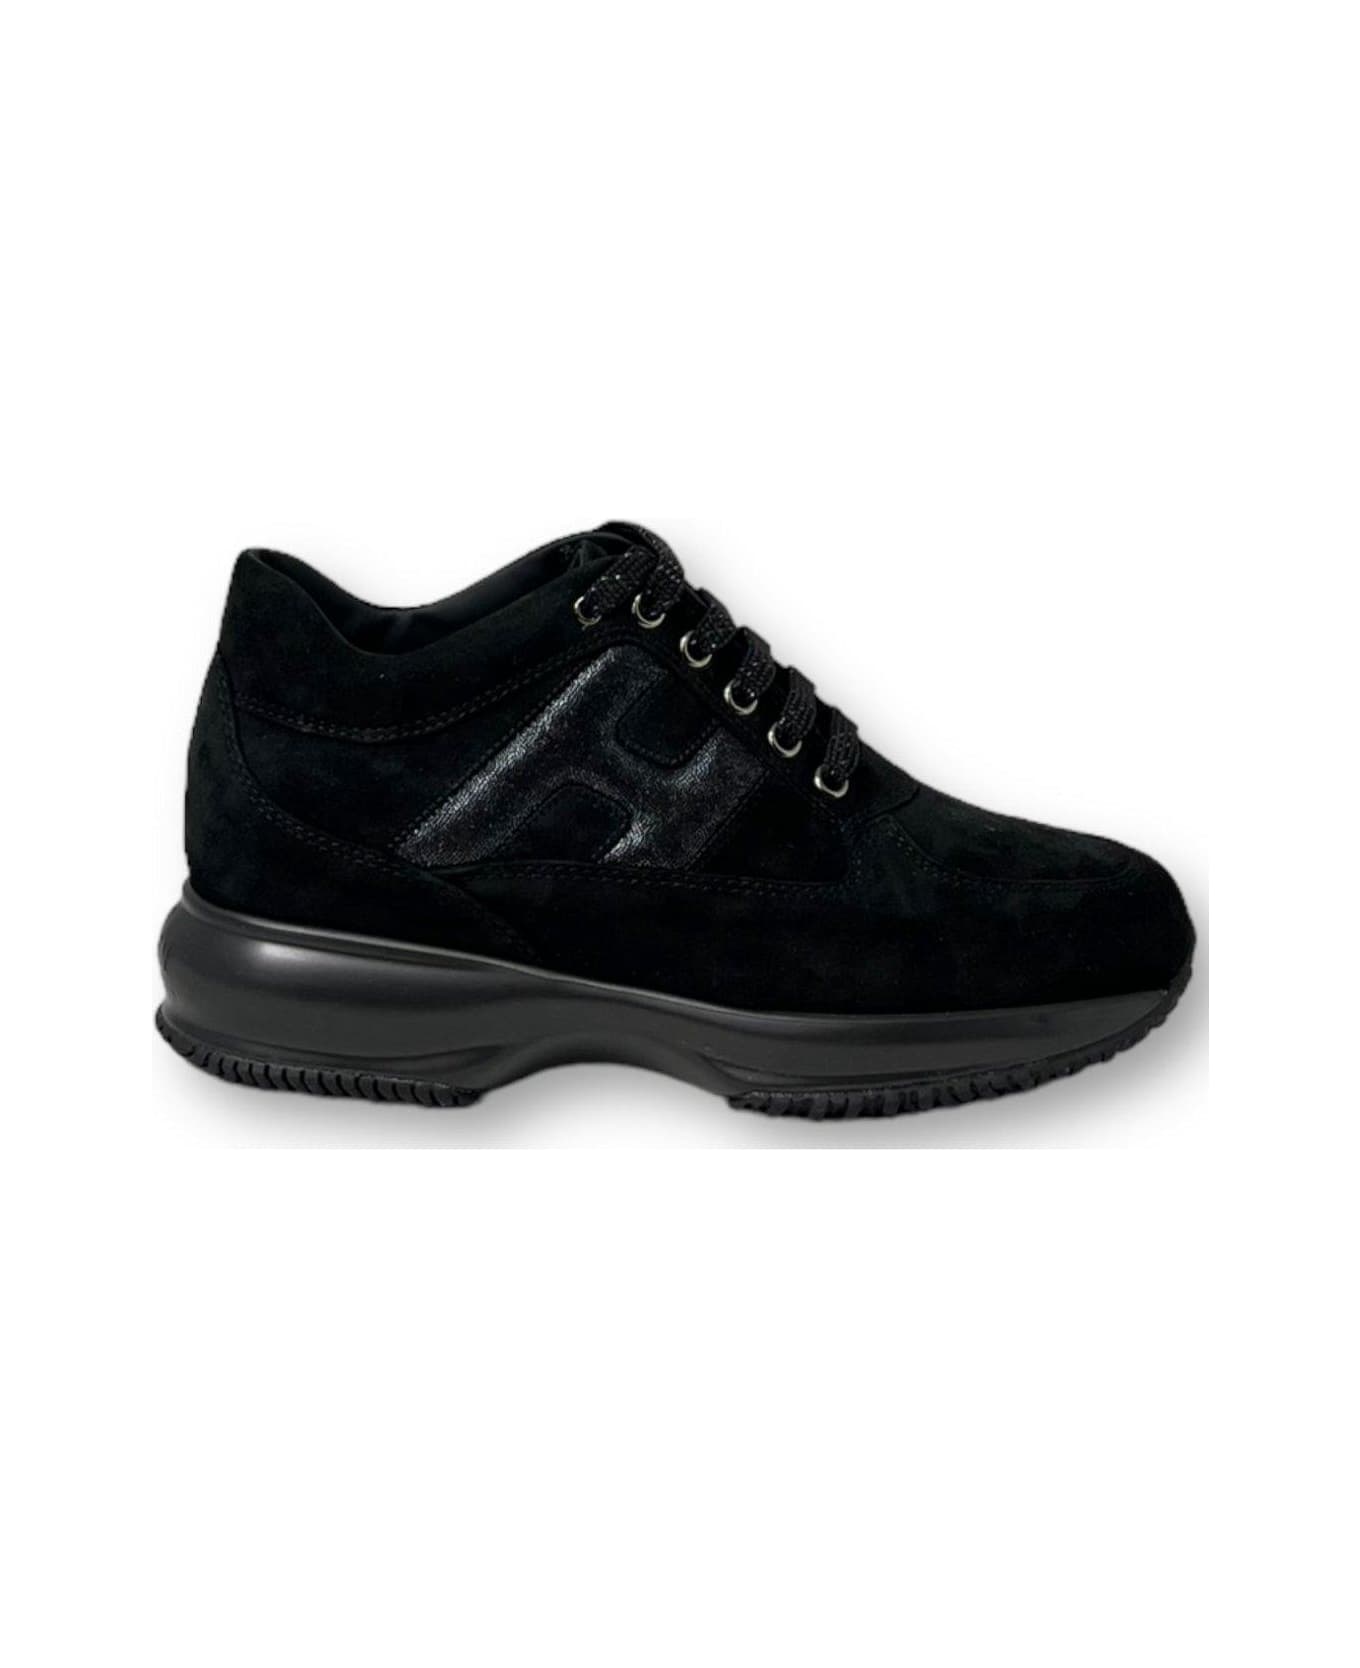 Hogan Interactive Lace-up Sneakers - Black スニーカー